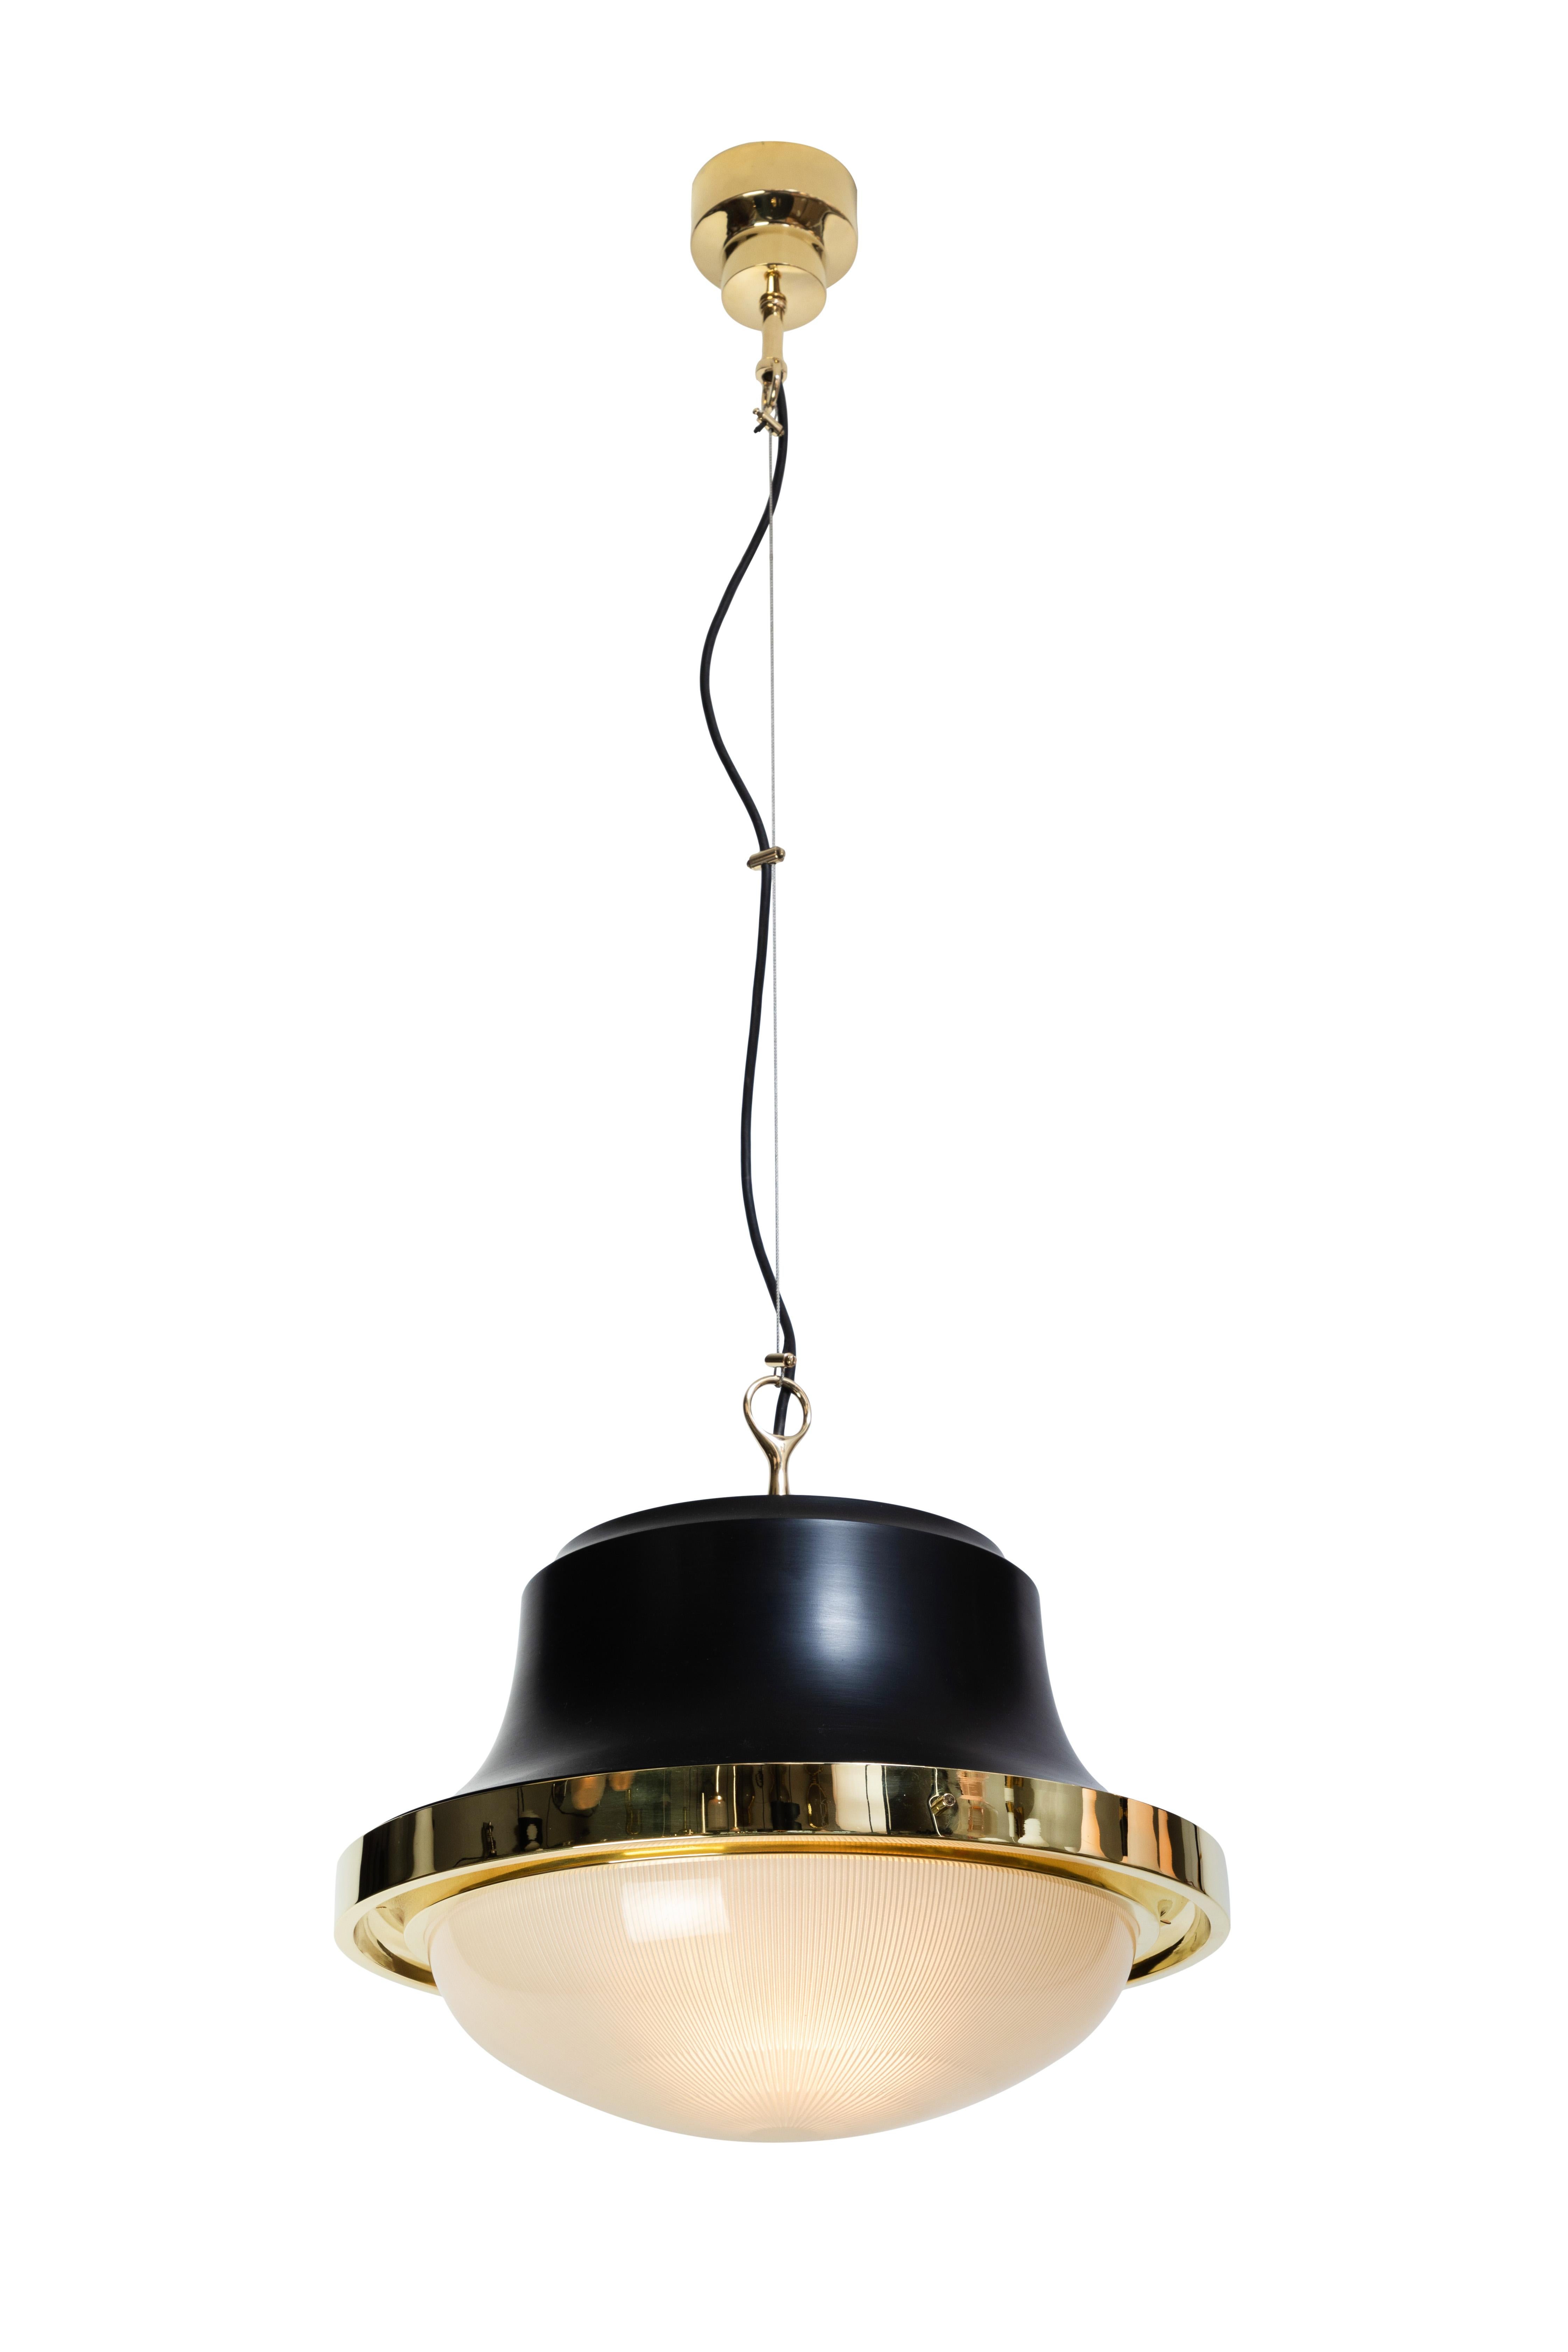 1960s Sergio Mazza 'Tau' pendants for Artmeide. Executed in polished brass, black painted metal, opaline and pressed glass. An incredibly warm and refined design from one of Italy's most illustrious midcentury icons. Height can be adjusted several